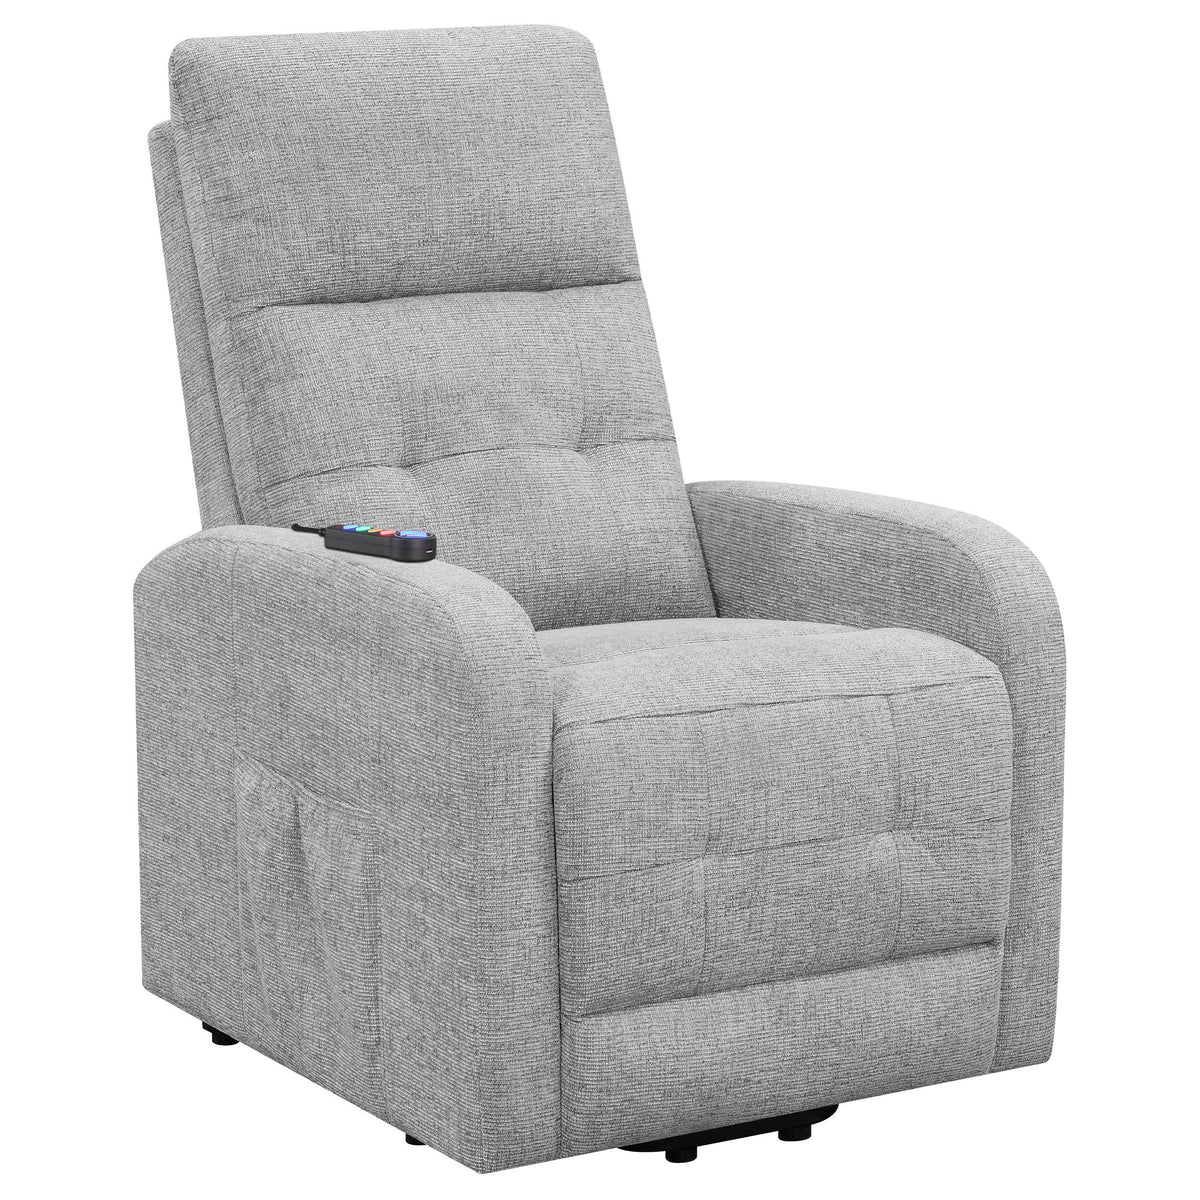 Howie Tufted Upholstered Power Lift Recliner Grey  Las Vegas Furniture Stores